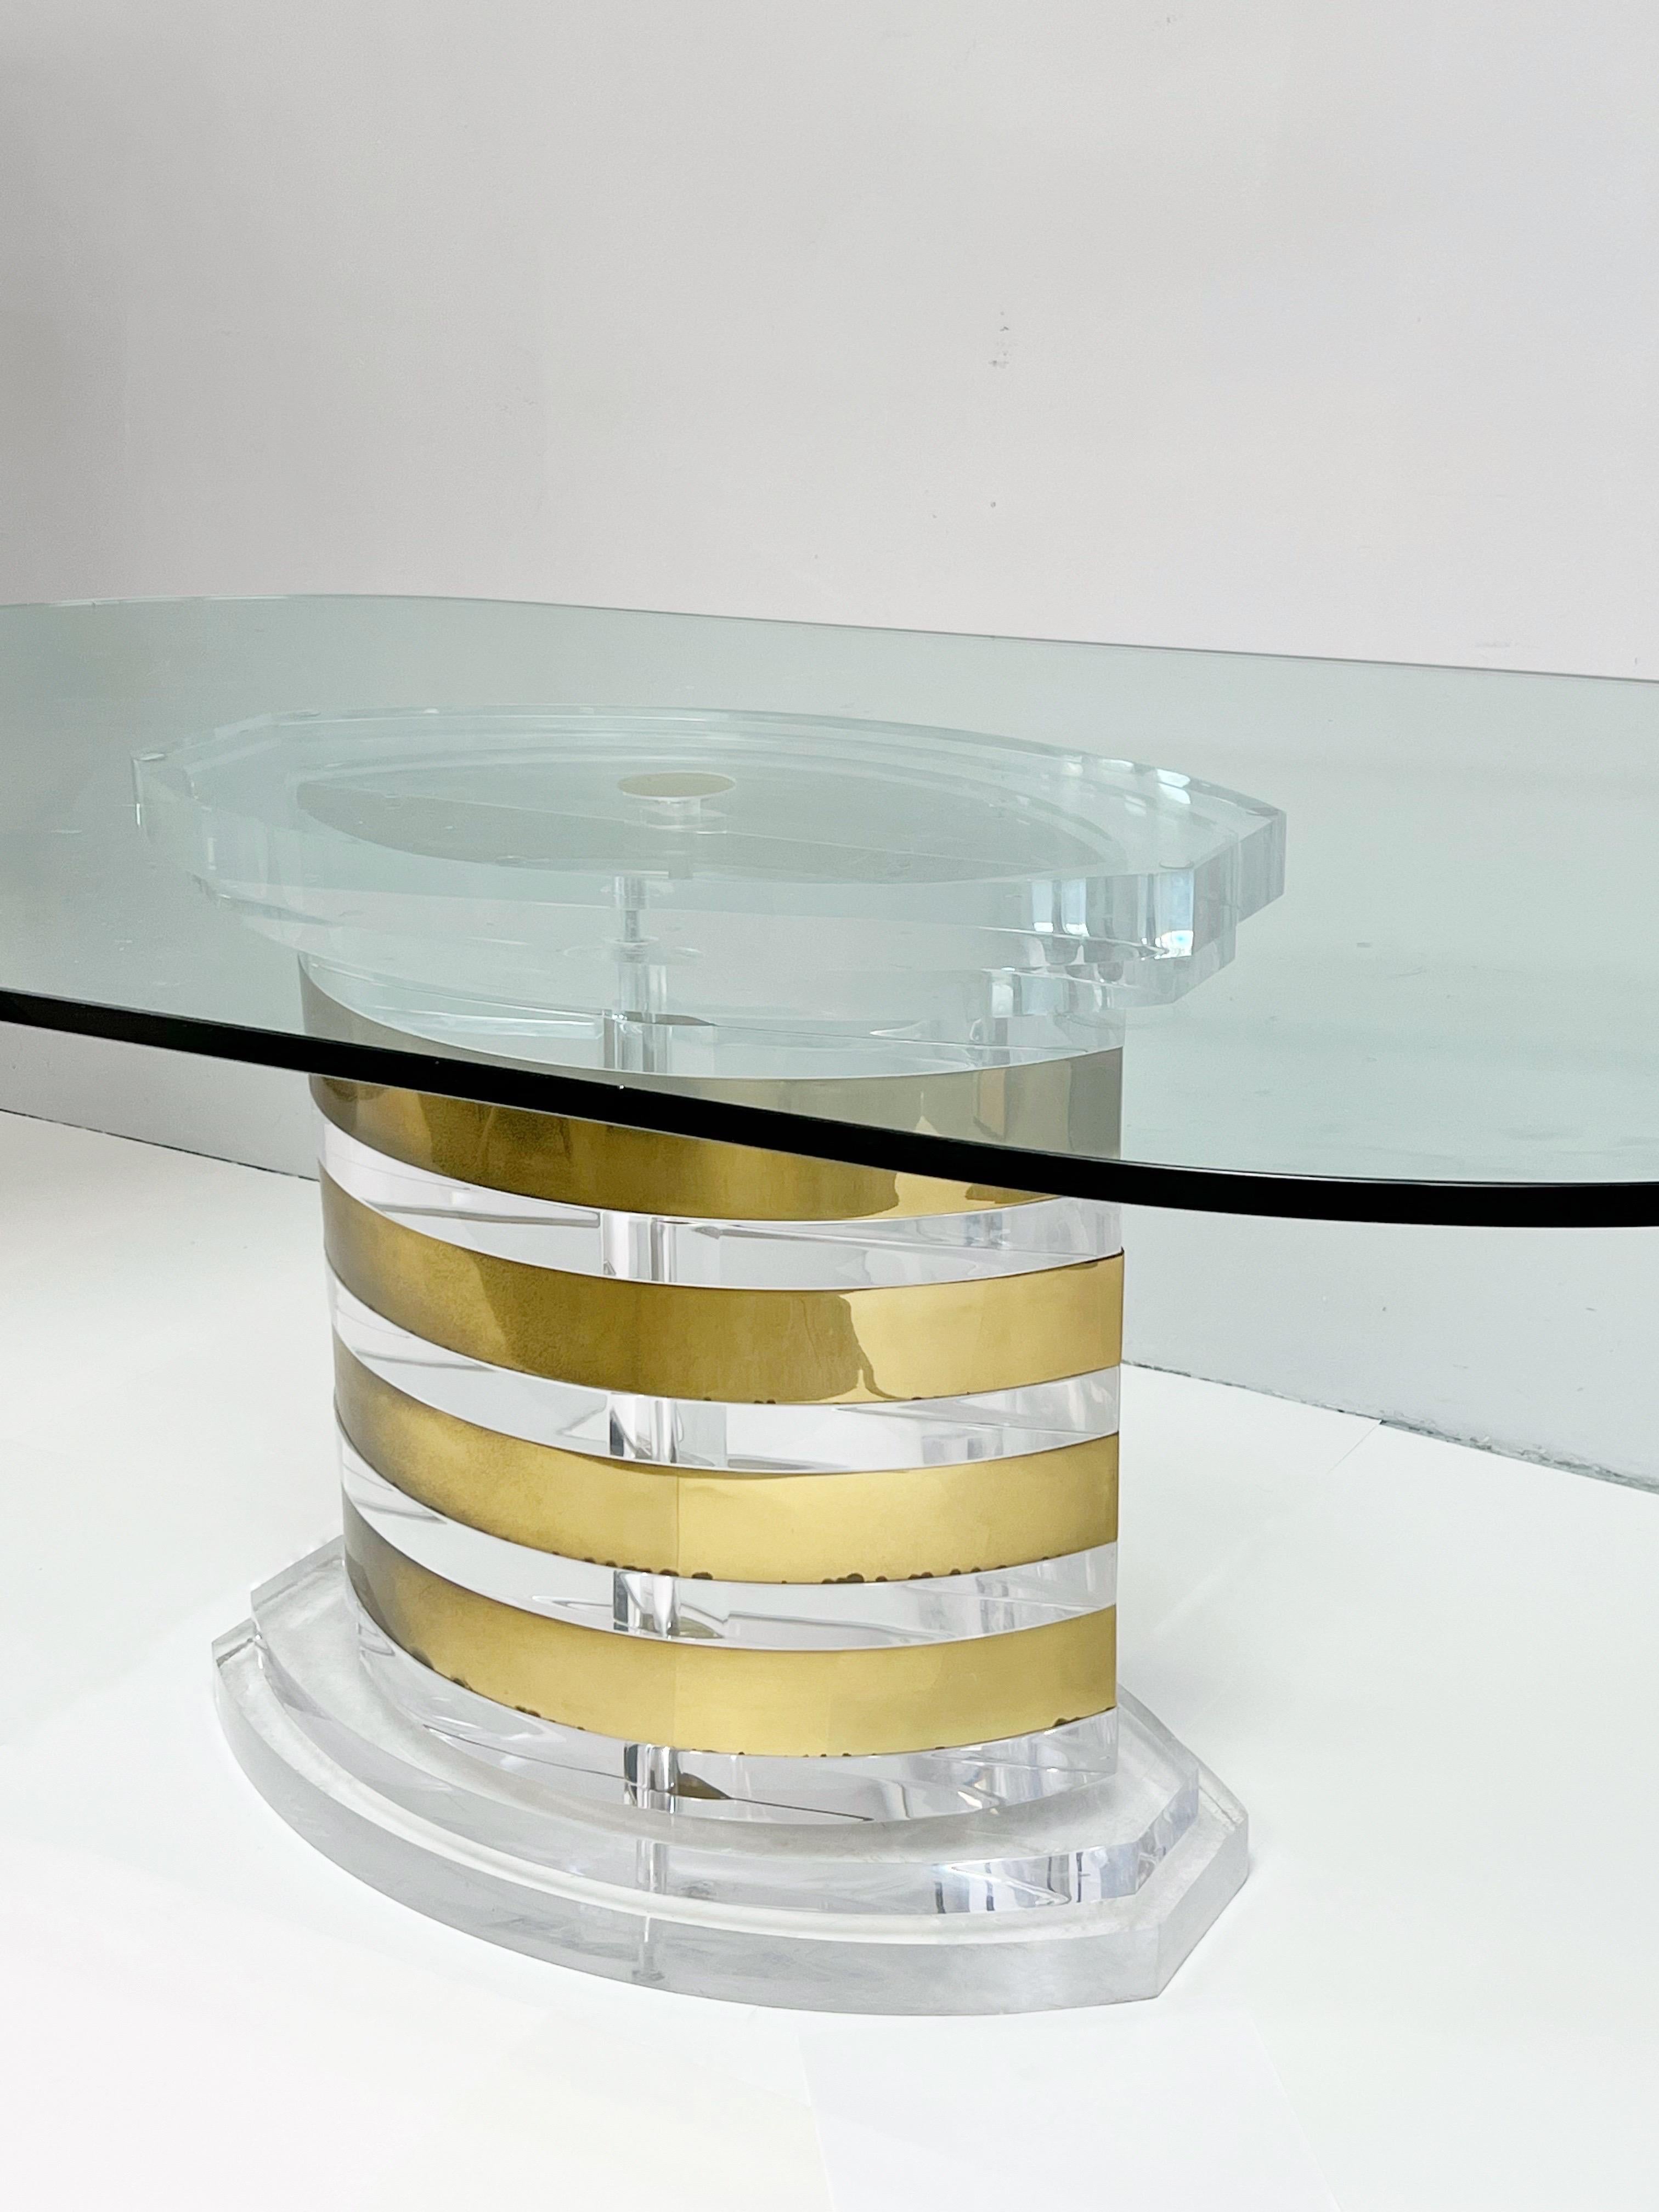 Spectacular table by Lion in Frost. The large pedestal is solid lucite with brass bands. Racetrack 3/4” glass top.